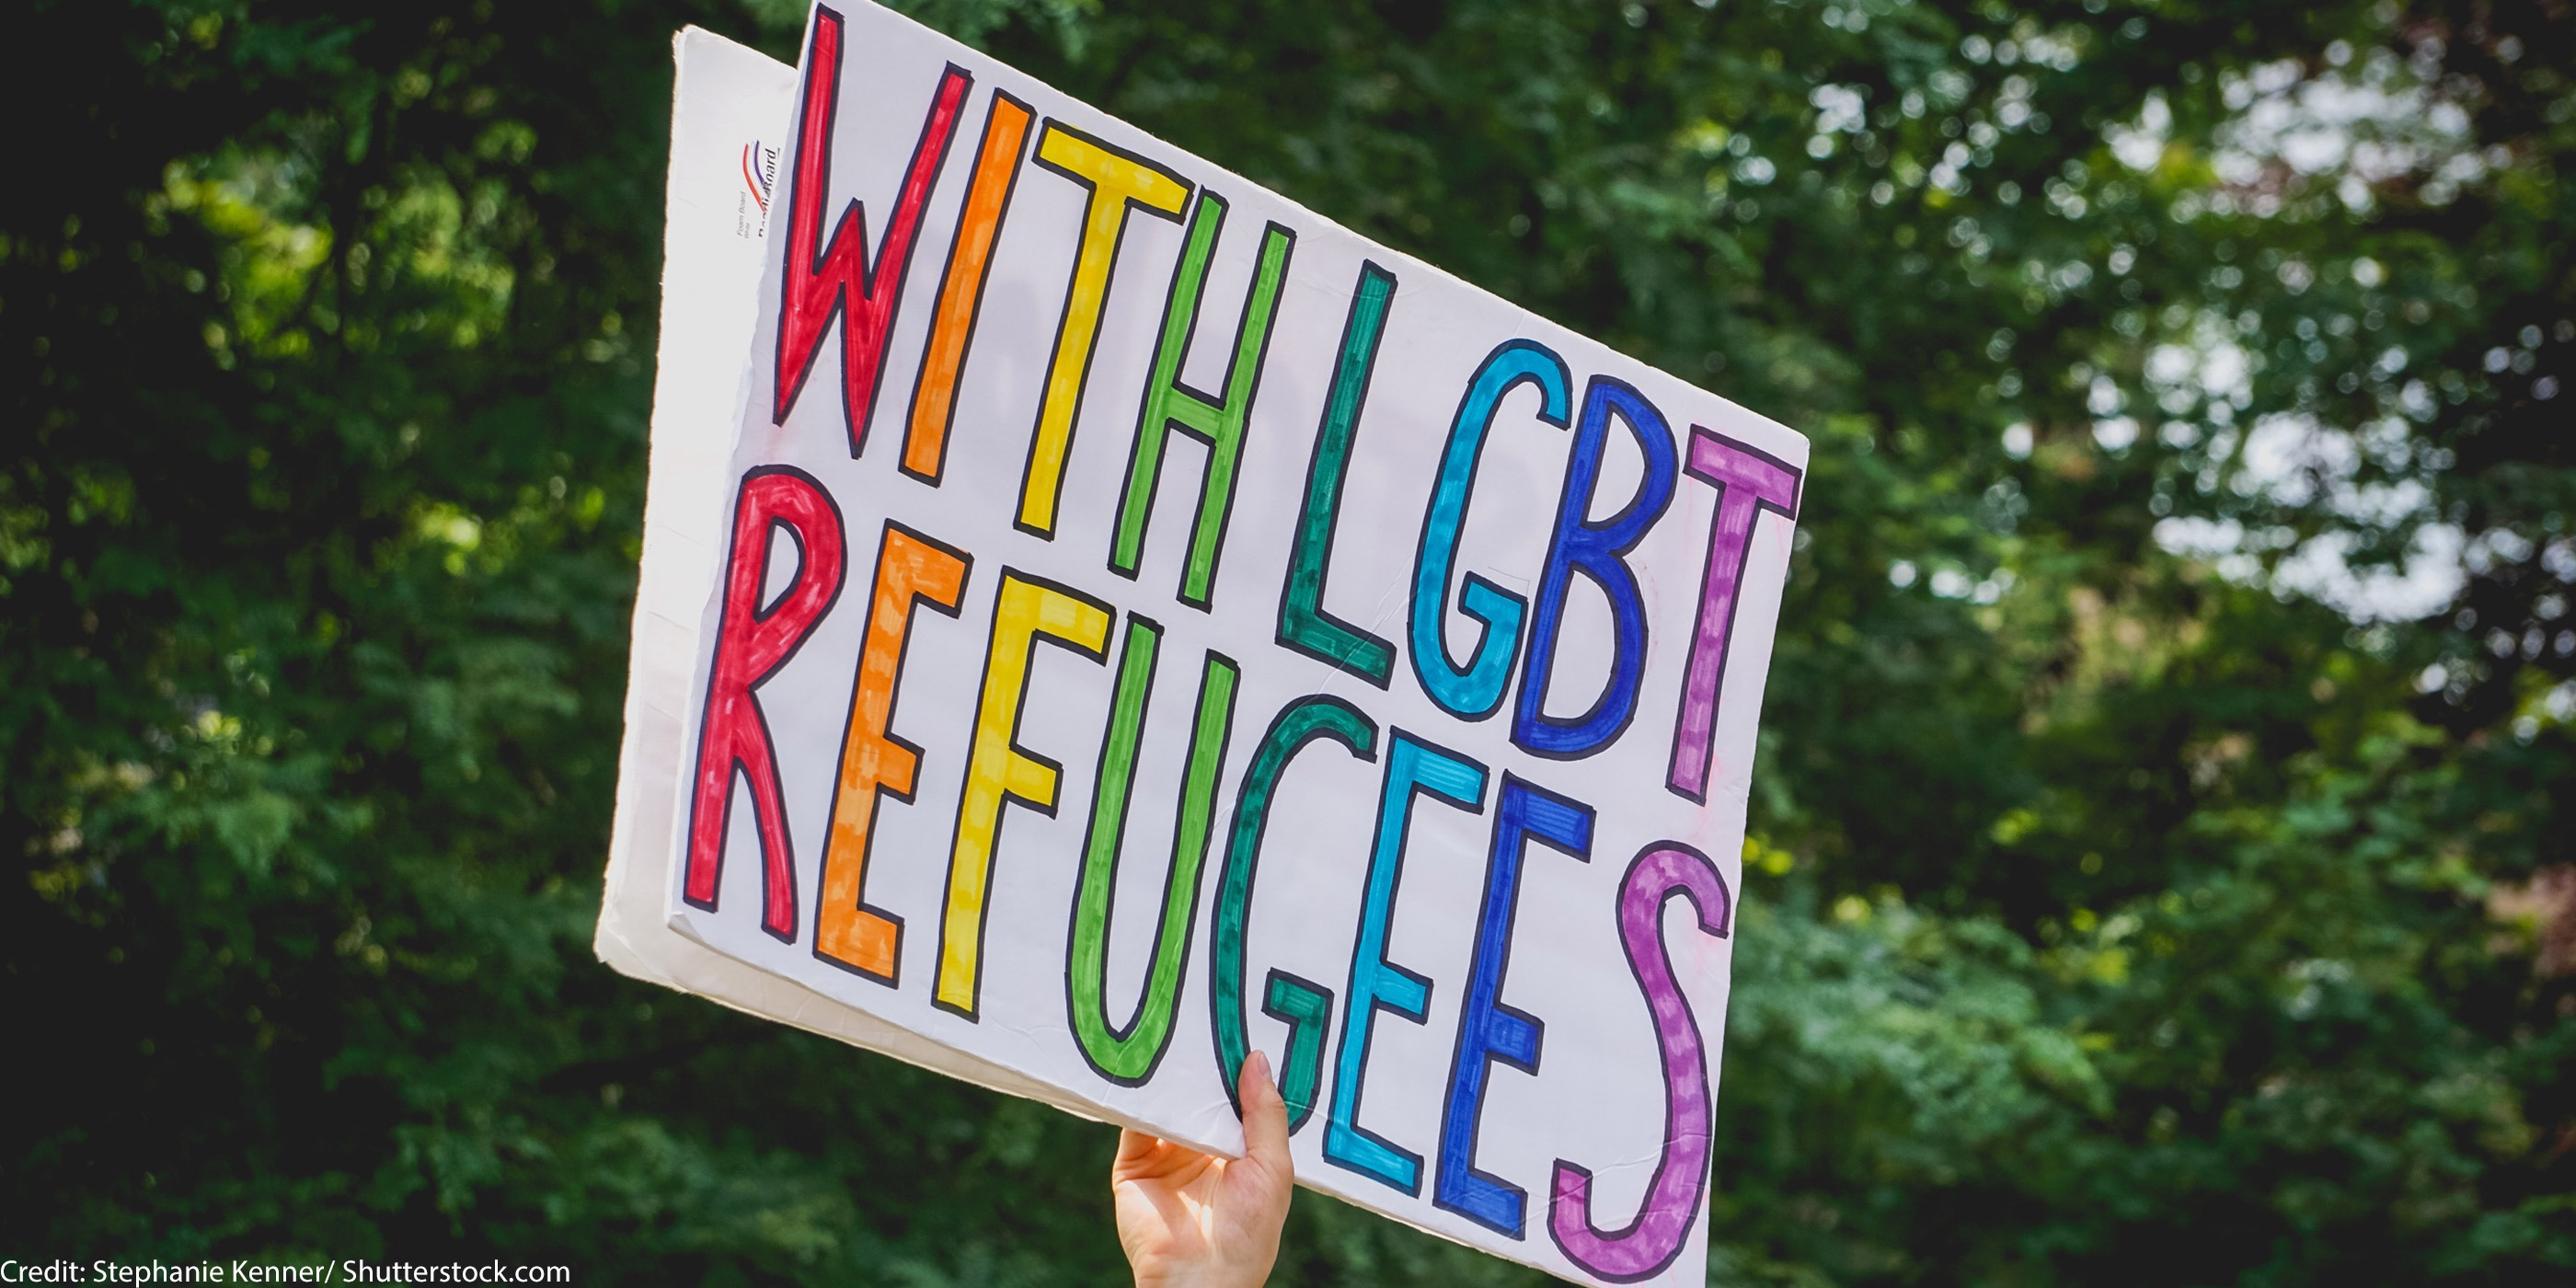 An individual holding a sign that says "With LGBT Refugees."